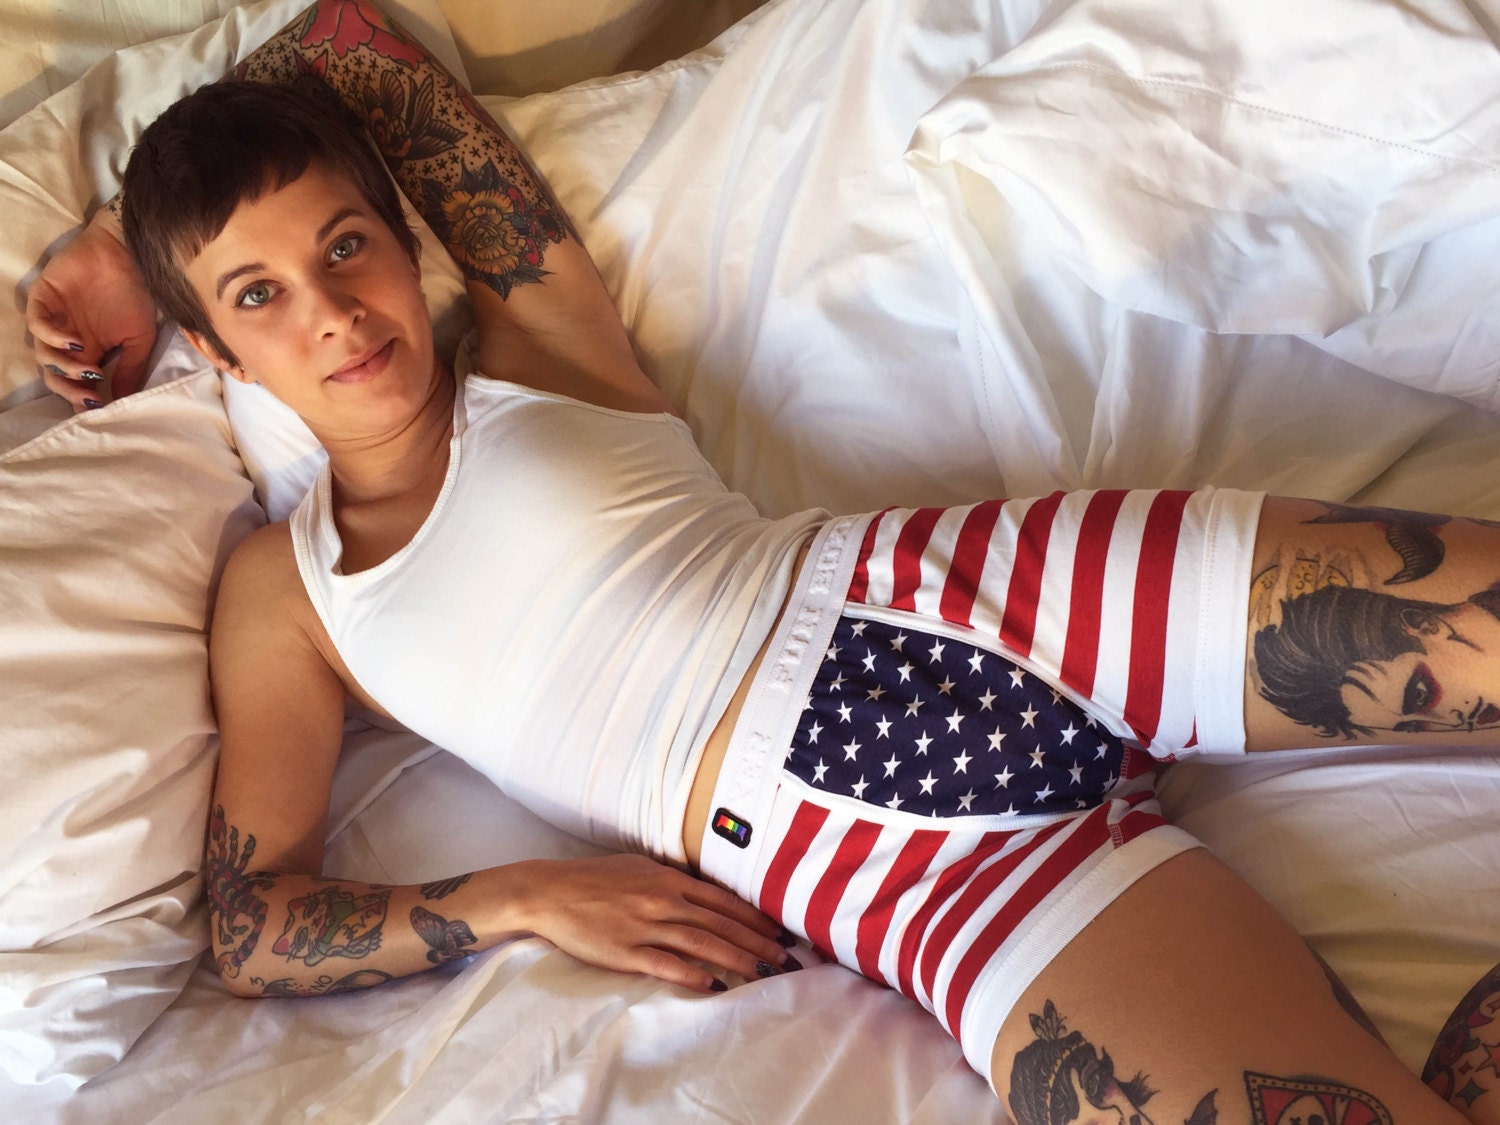 OUT Is In USA UniSex Boxers American Flag BoxersStars N